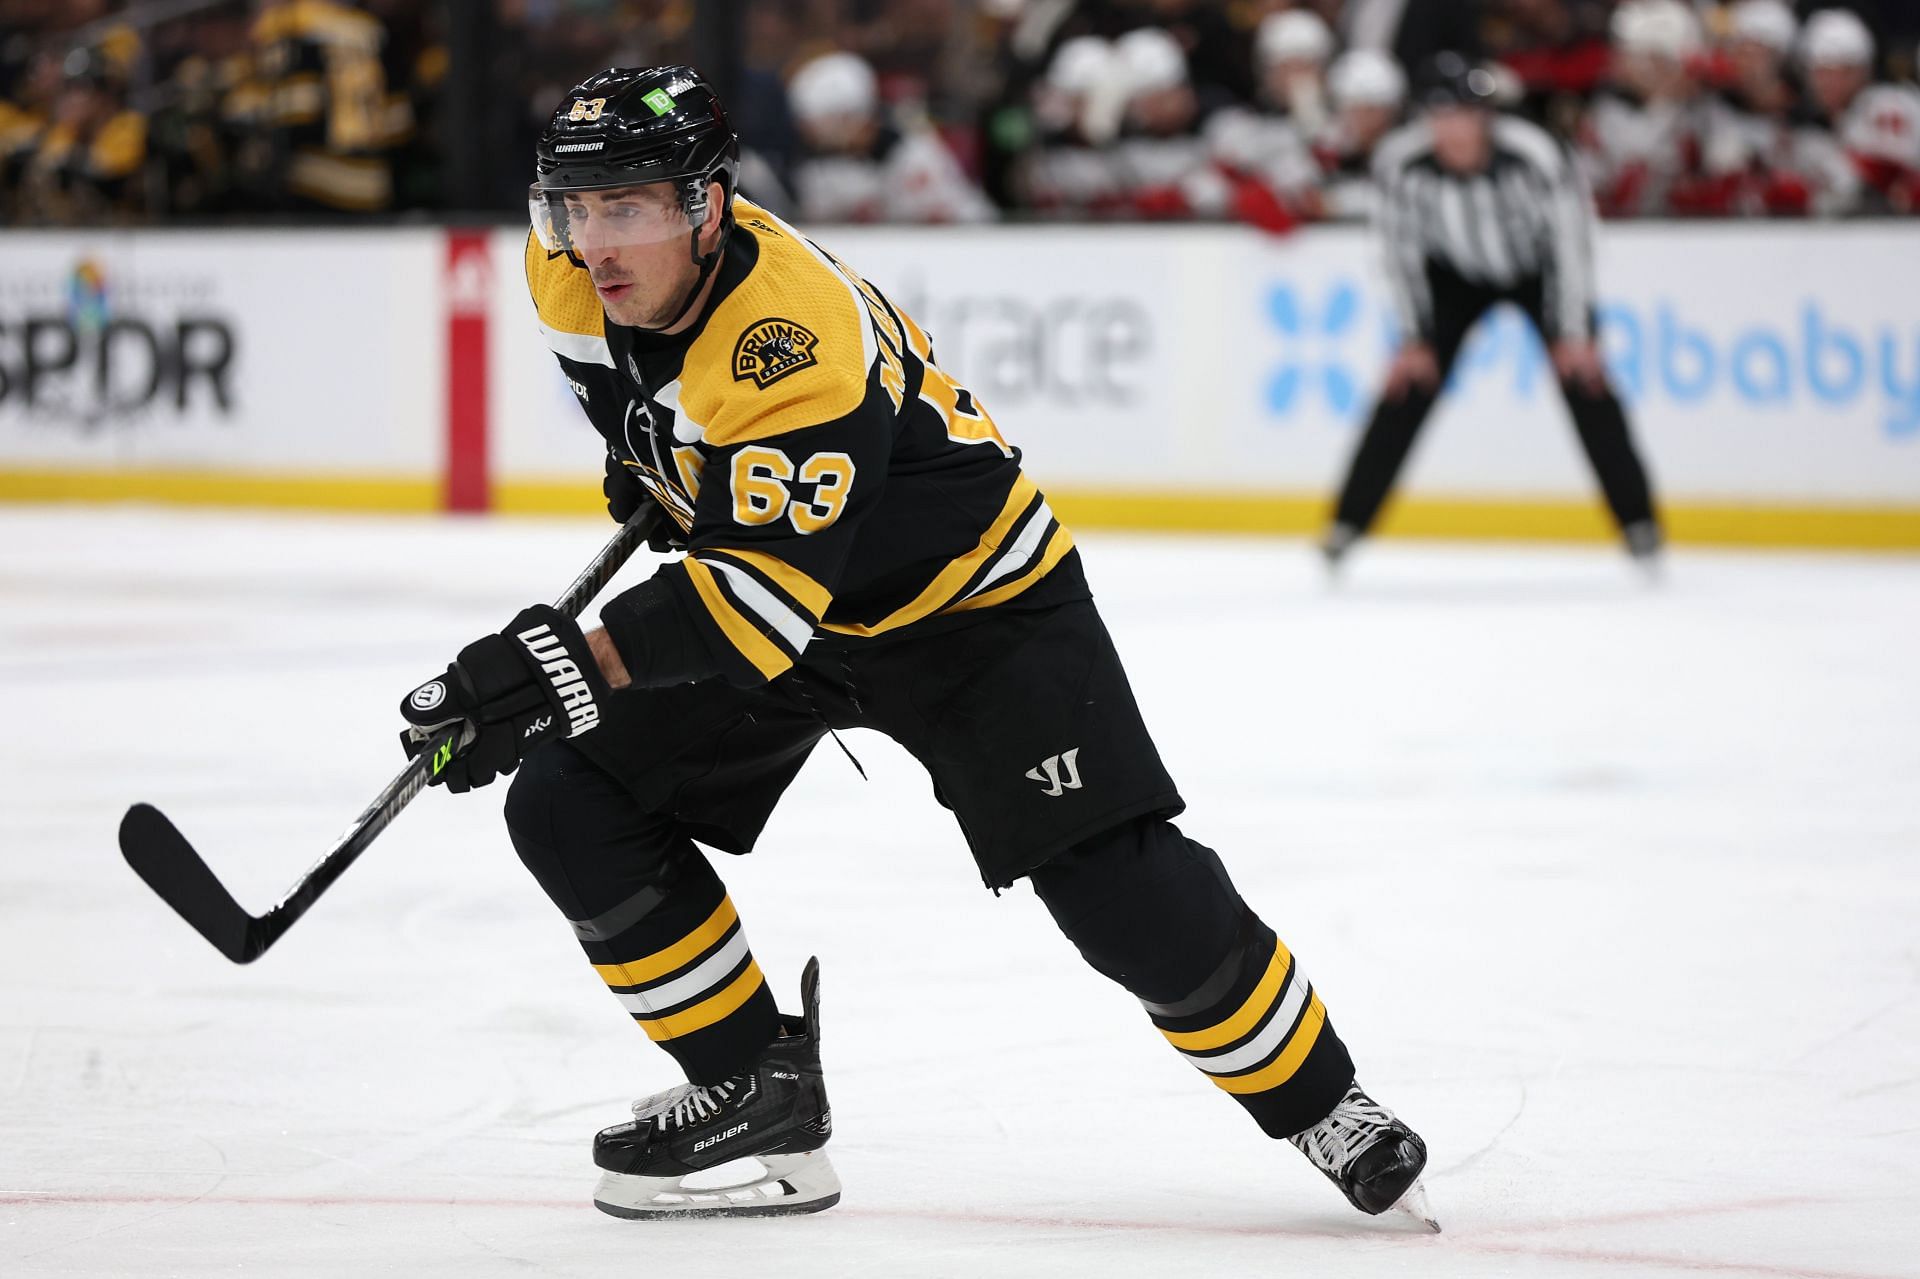 Brad Marchand named next captain of the Boston Bruins